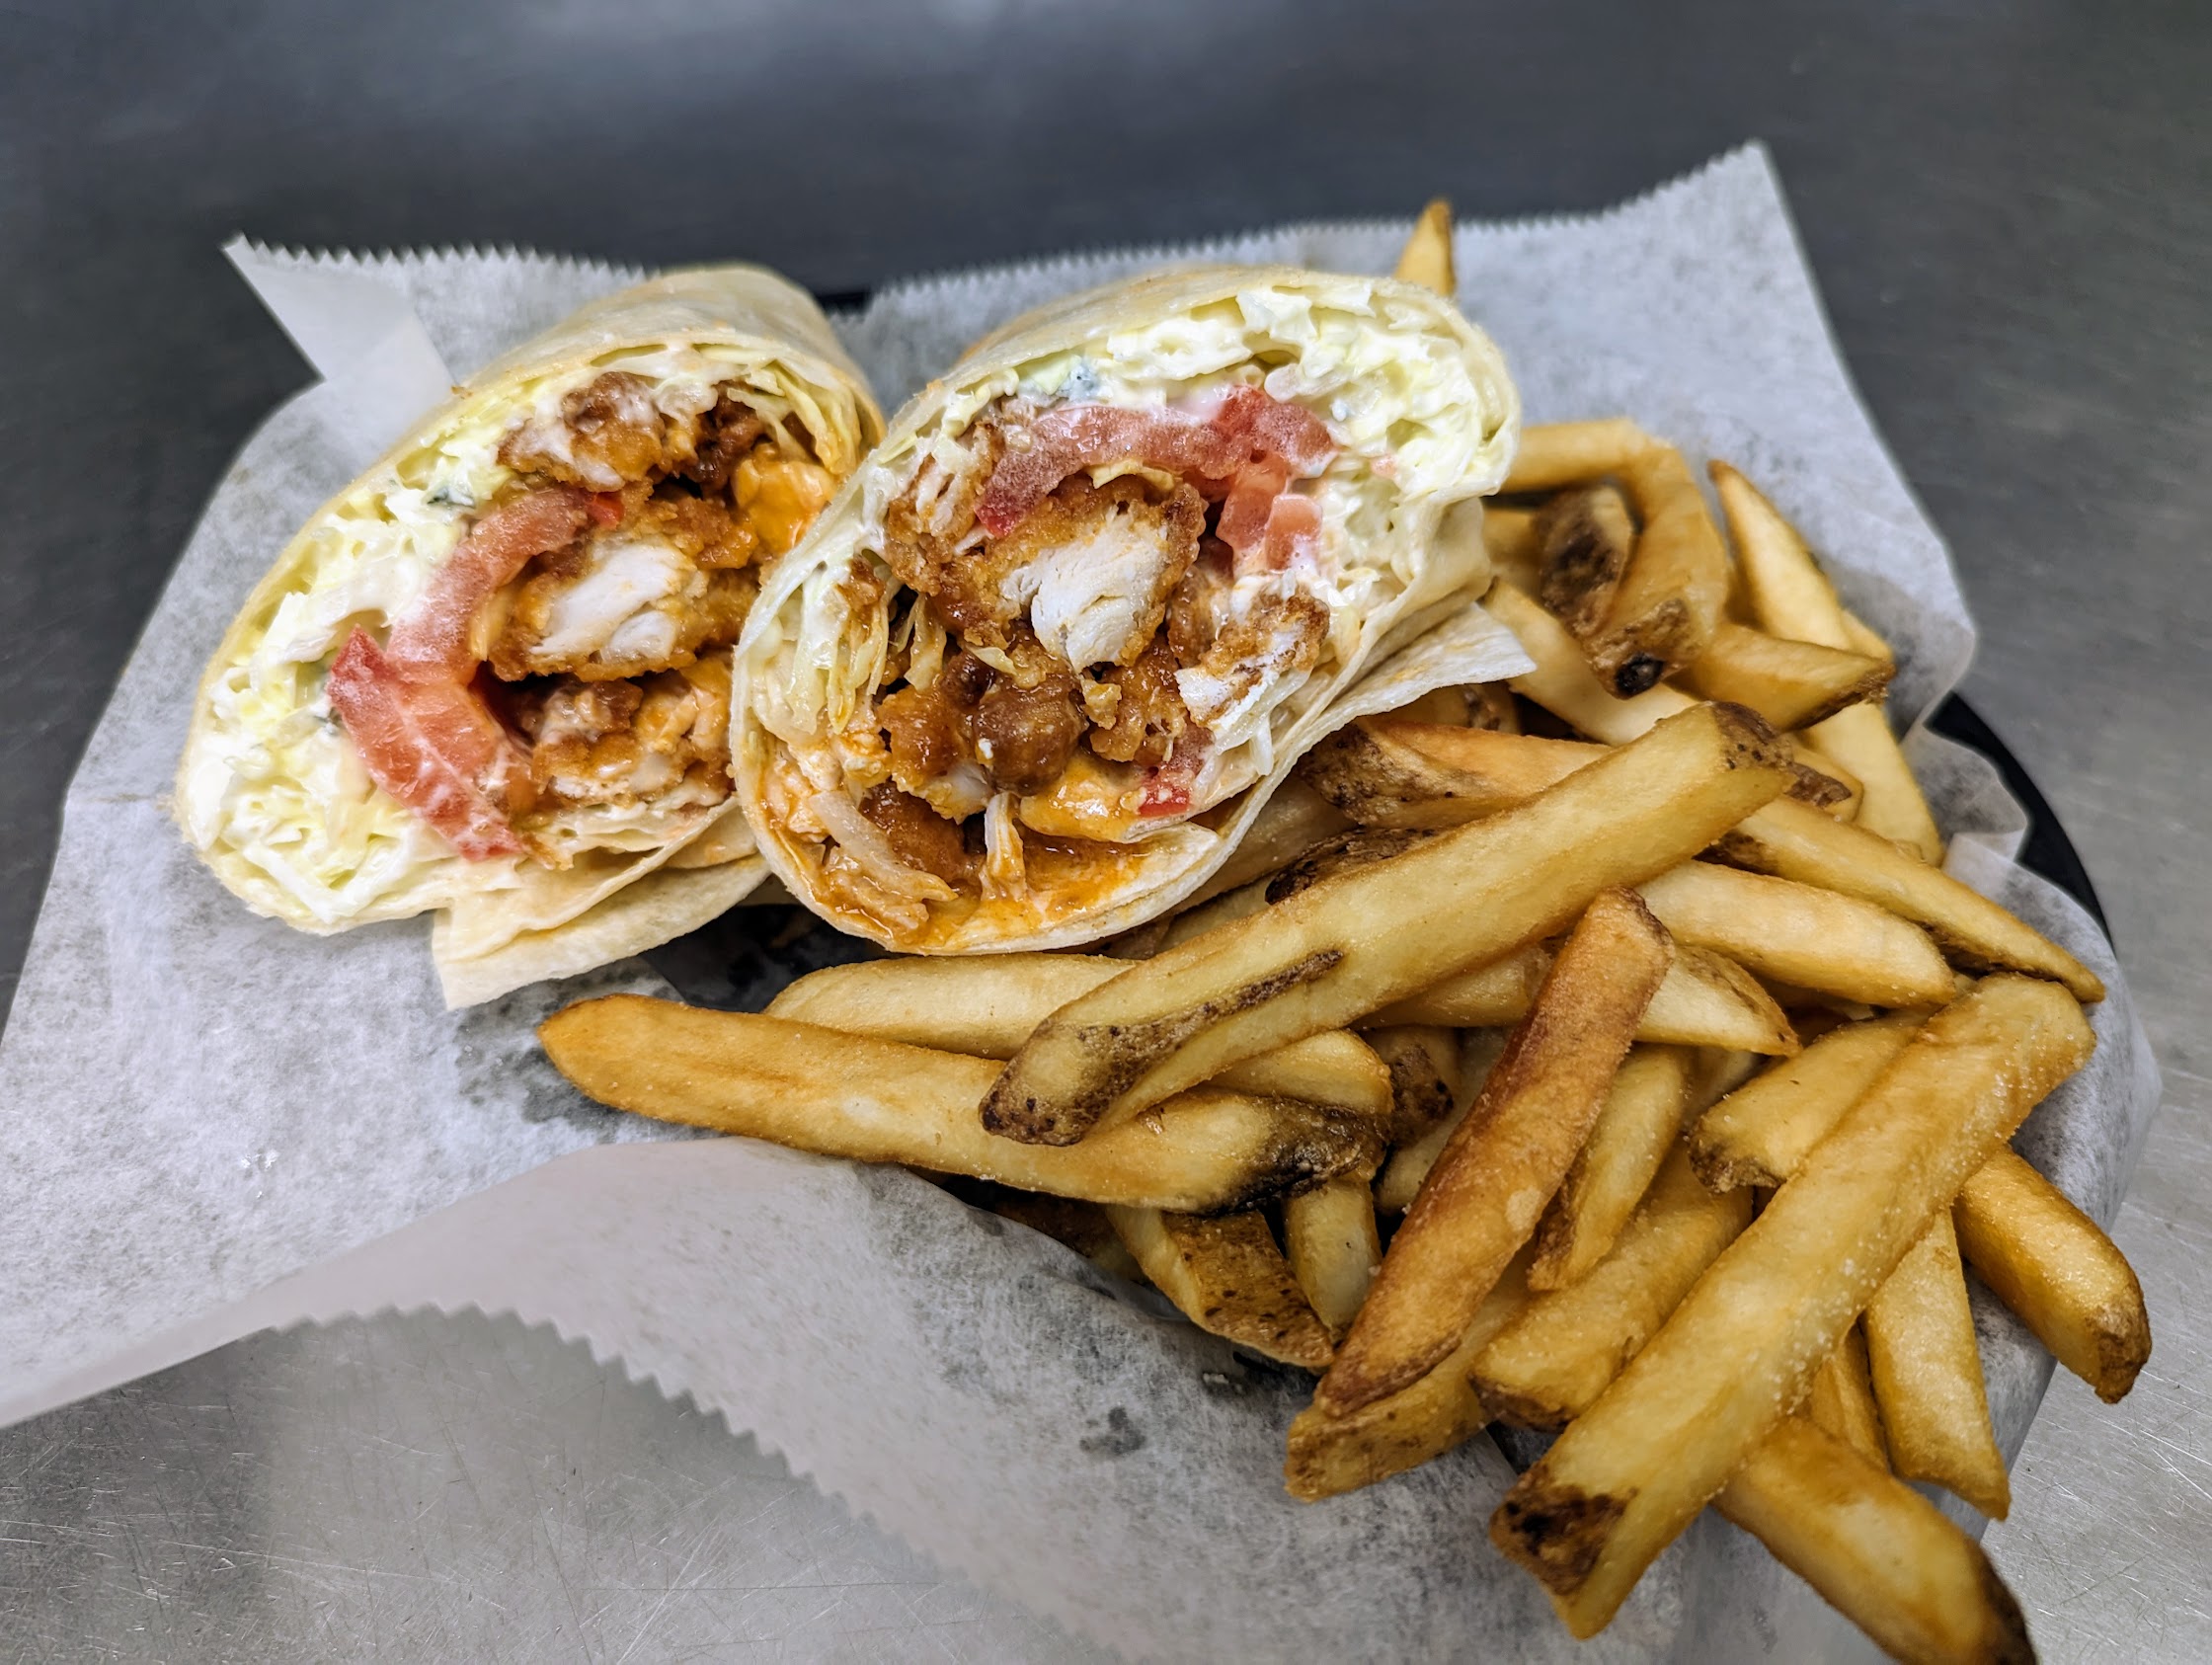 A burrito with french fries on a plate.